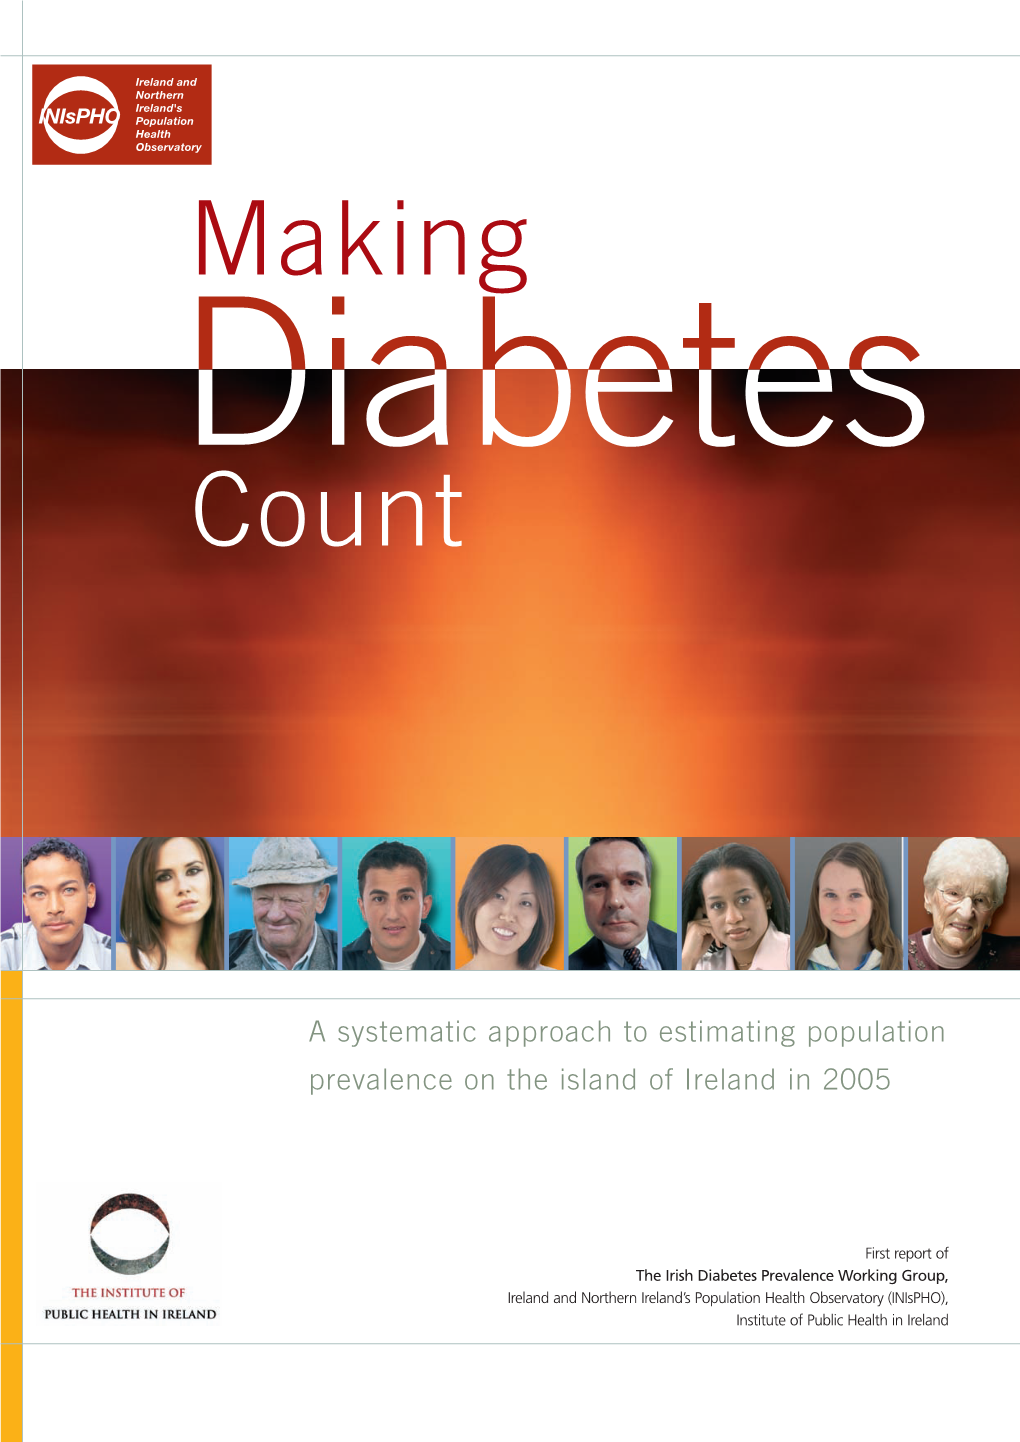 Making Diabetes Count. a Systematic Approach to Estimating Population Prevalence on the Island of Ireland in 2005